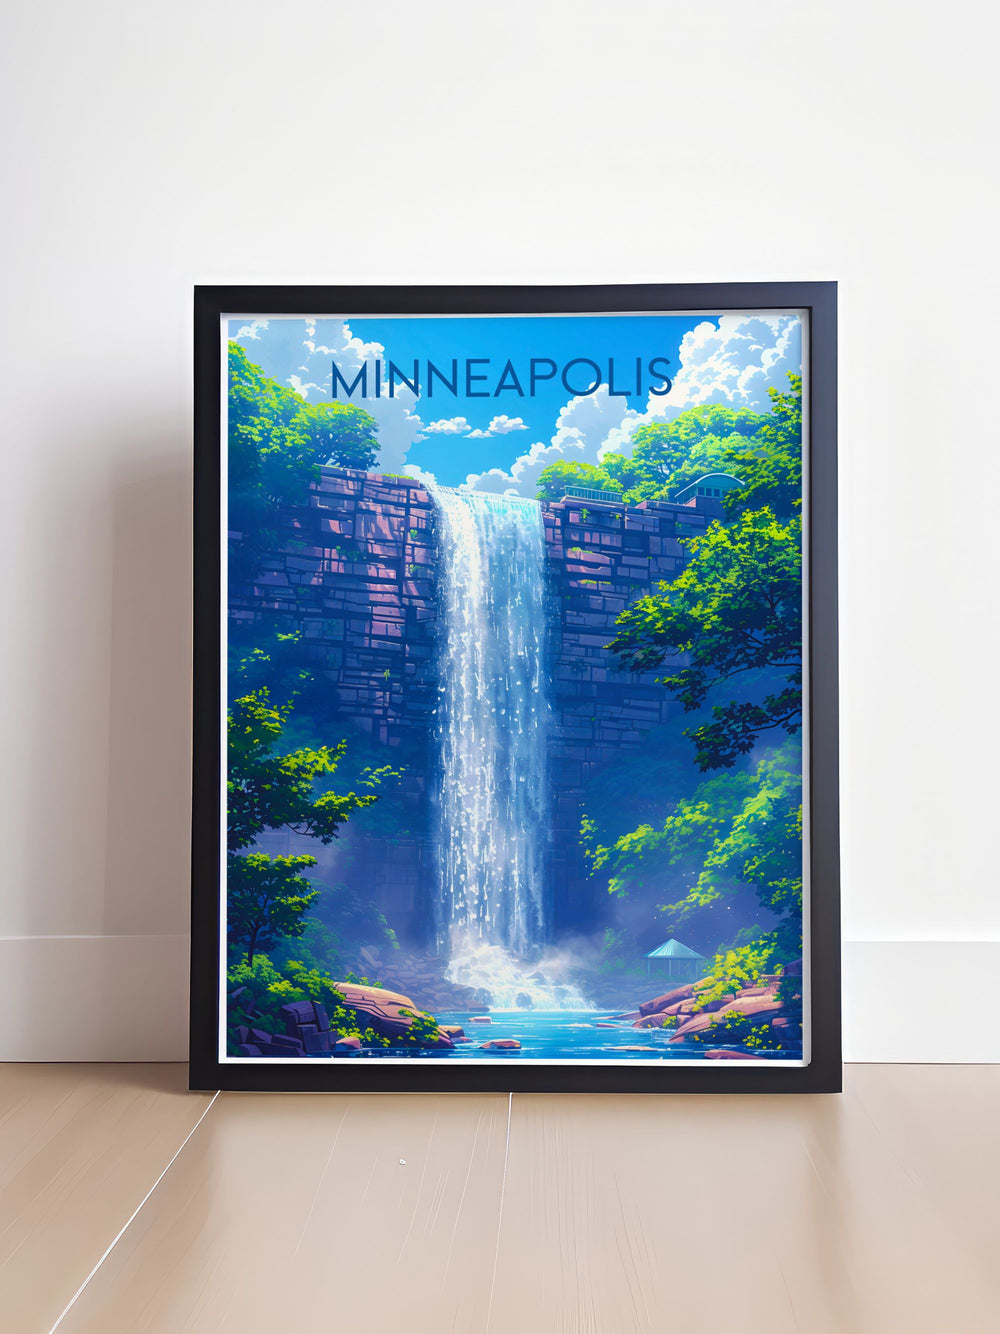 Bring the vibrant energy of Minneapolis into your home with this travel poster, capturing its stunning architectural marvels and urban charm, ideal for any city enthusiast.